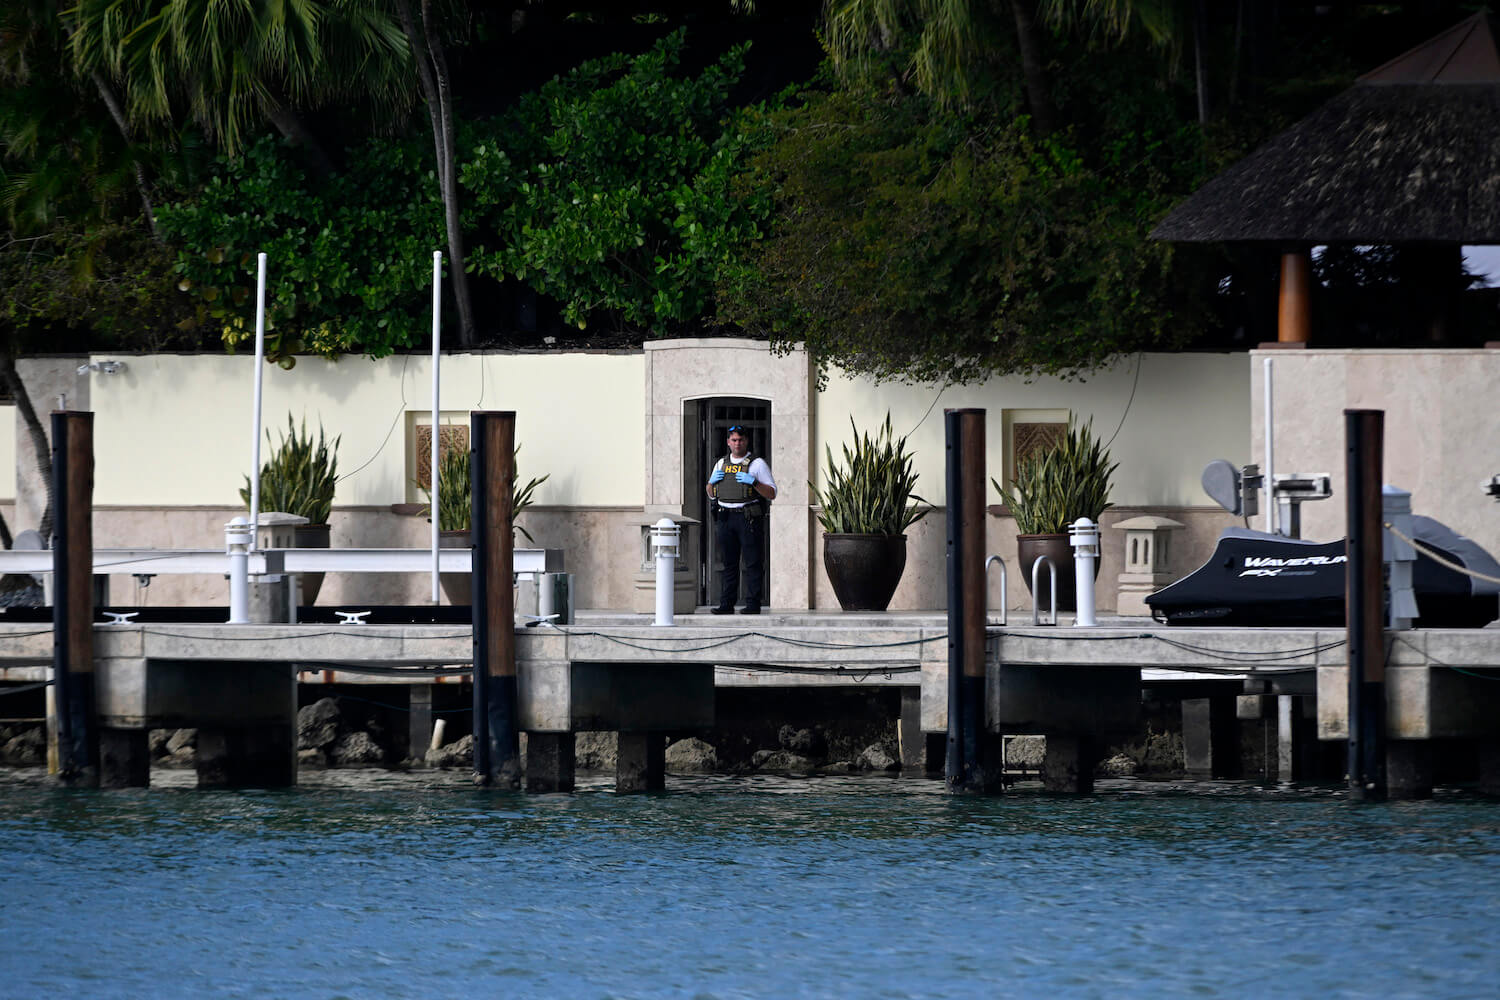 A Homeland Security officer at Sean 'P. Diddy' Combs' waterfront home in Miami